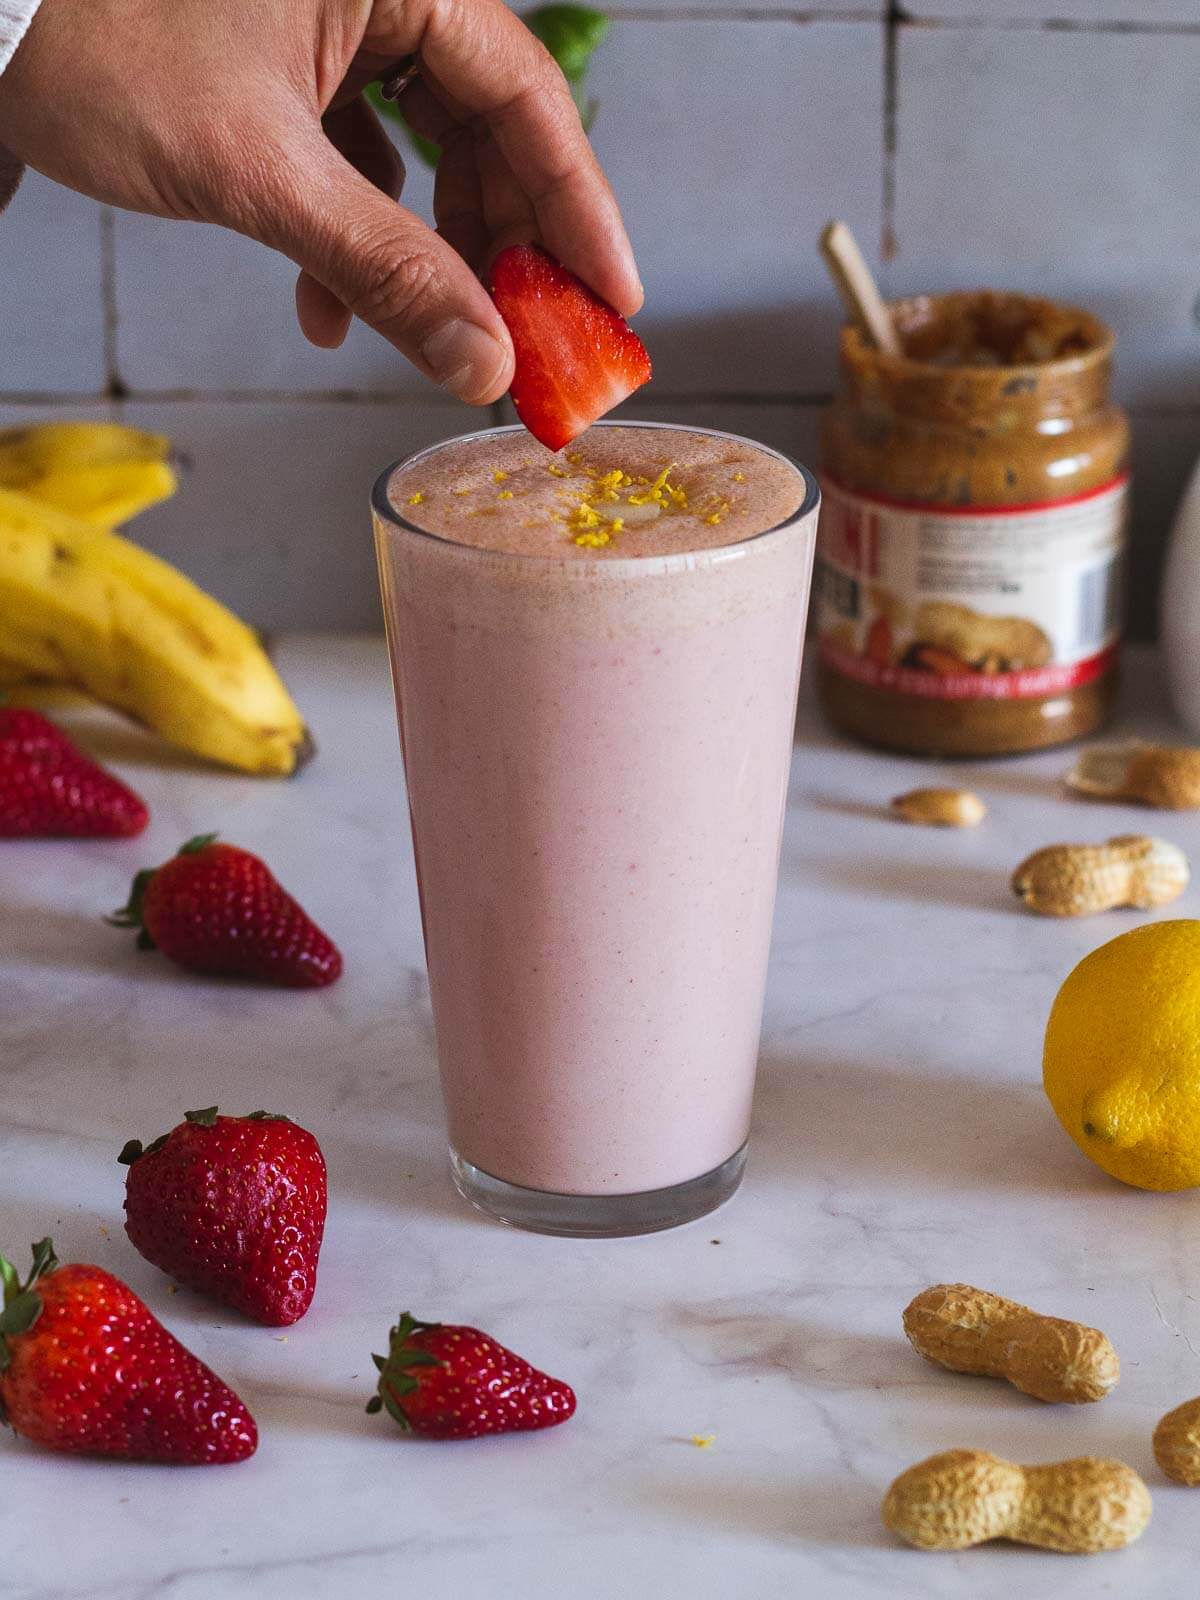 garnishing peanut butter strawberry smoothie with a fruit slice.